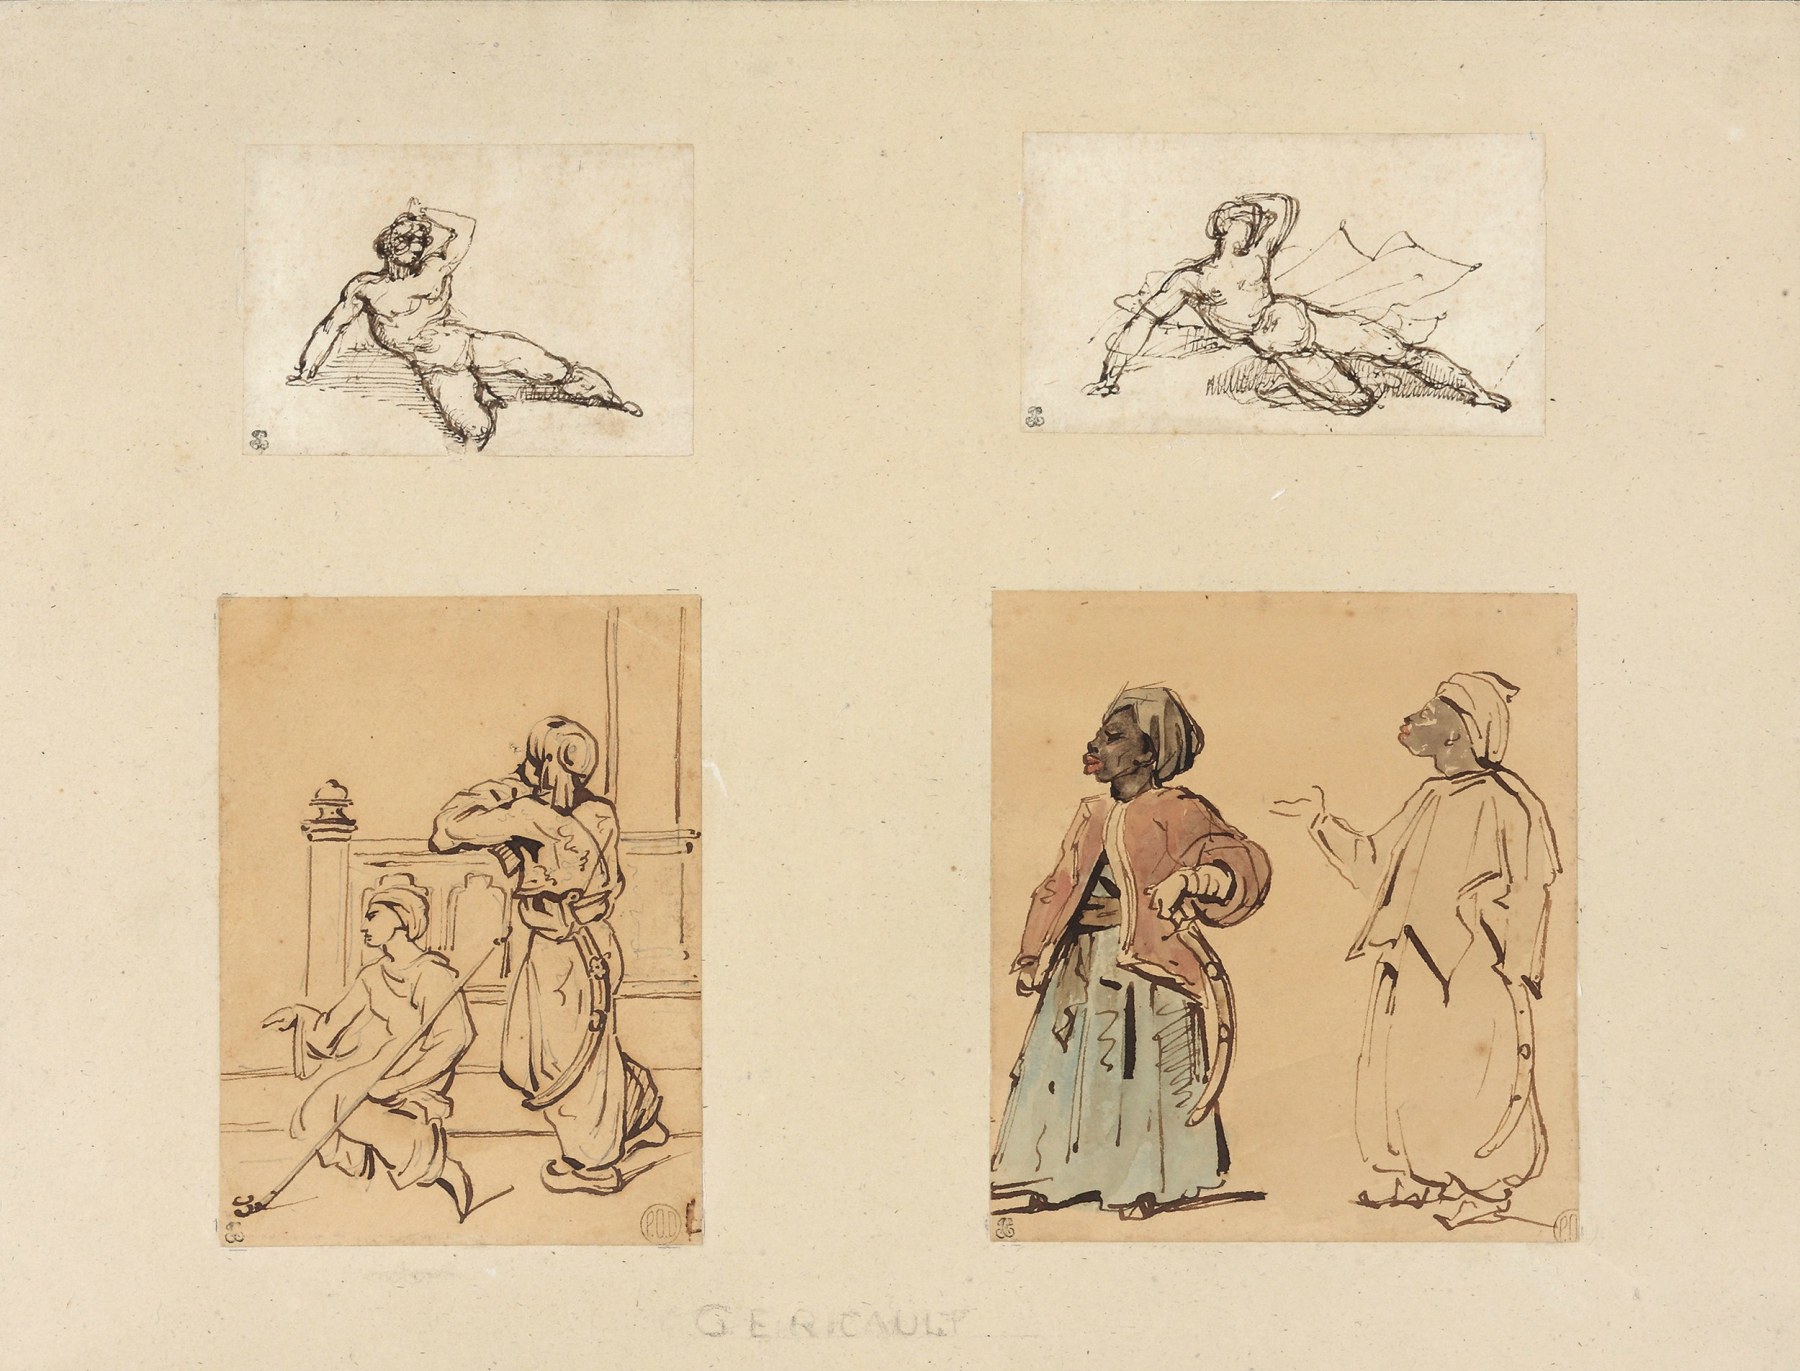 Th&eacute;odore G&eacute;ricault  Four drawings: Two Reclining Male Nudes and Two Studies of Arabs  Watercilor and ink on paper 13 x 16 1/8 inches